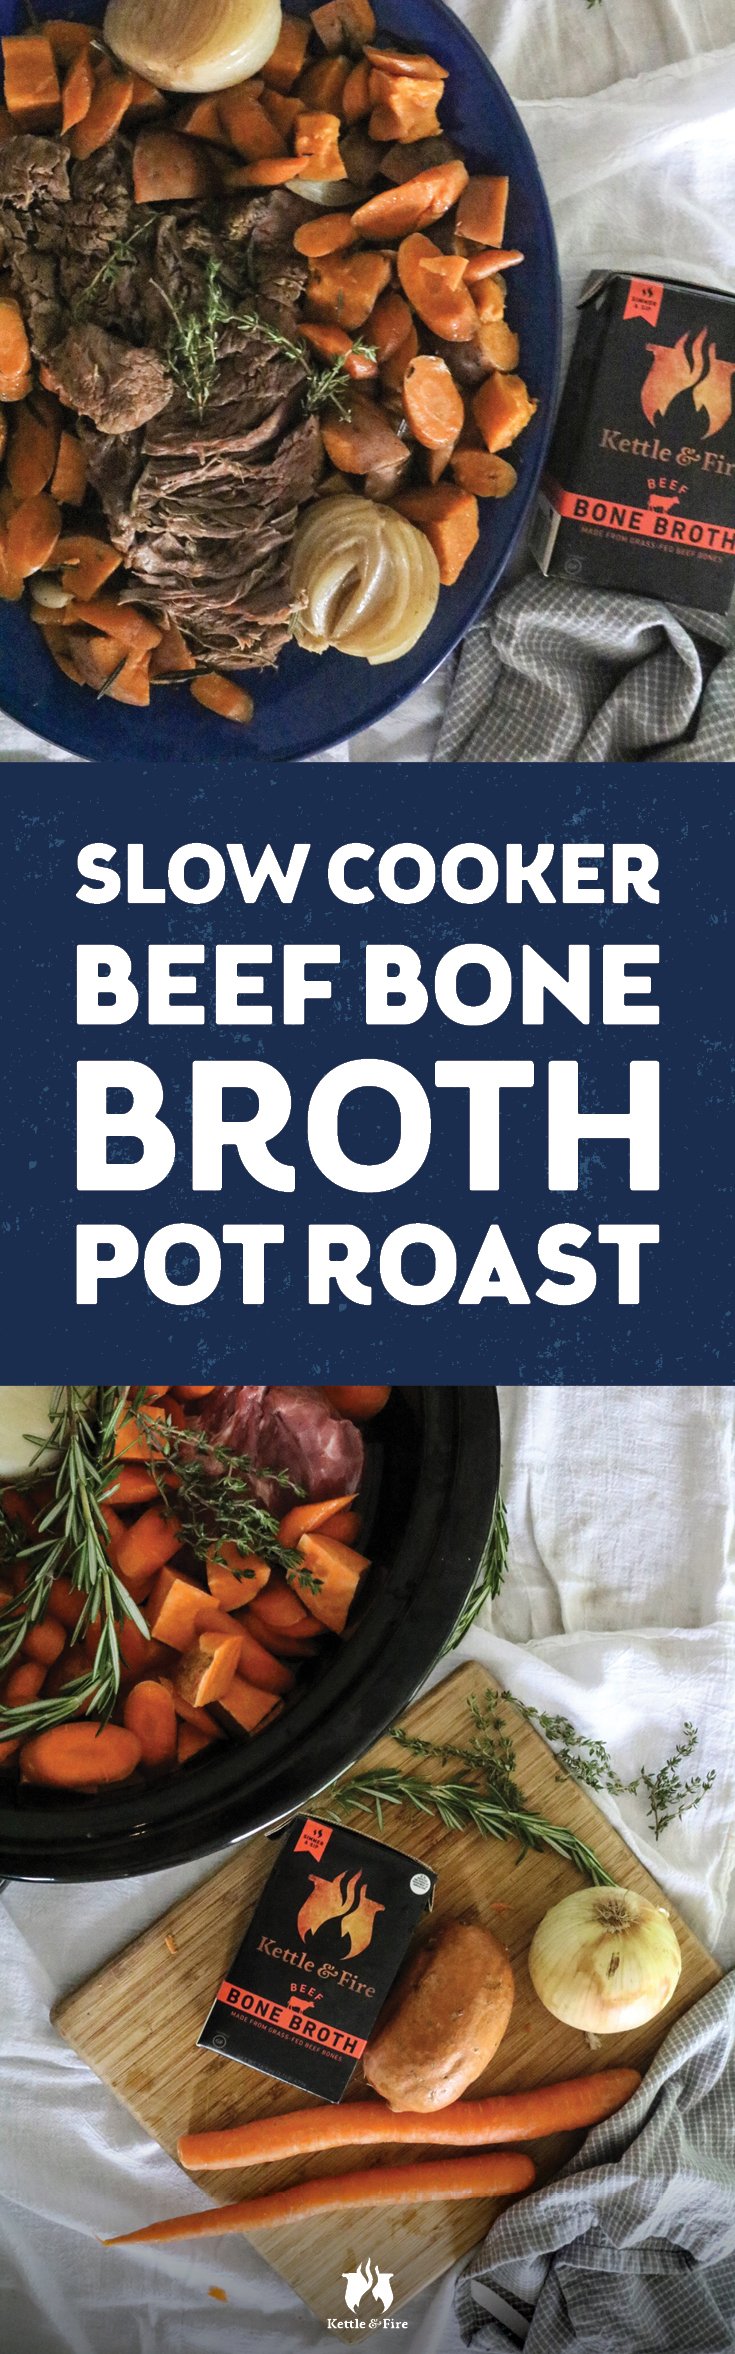 A tender beef slow cooker pot roast, cooked in beef bone broth for extra flavour and simmered with rosemary and thyme. Served with sweet potatoes, this hassle-free recipe is what Sunday dinner dreams are made of.